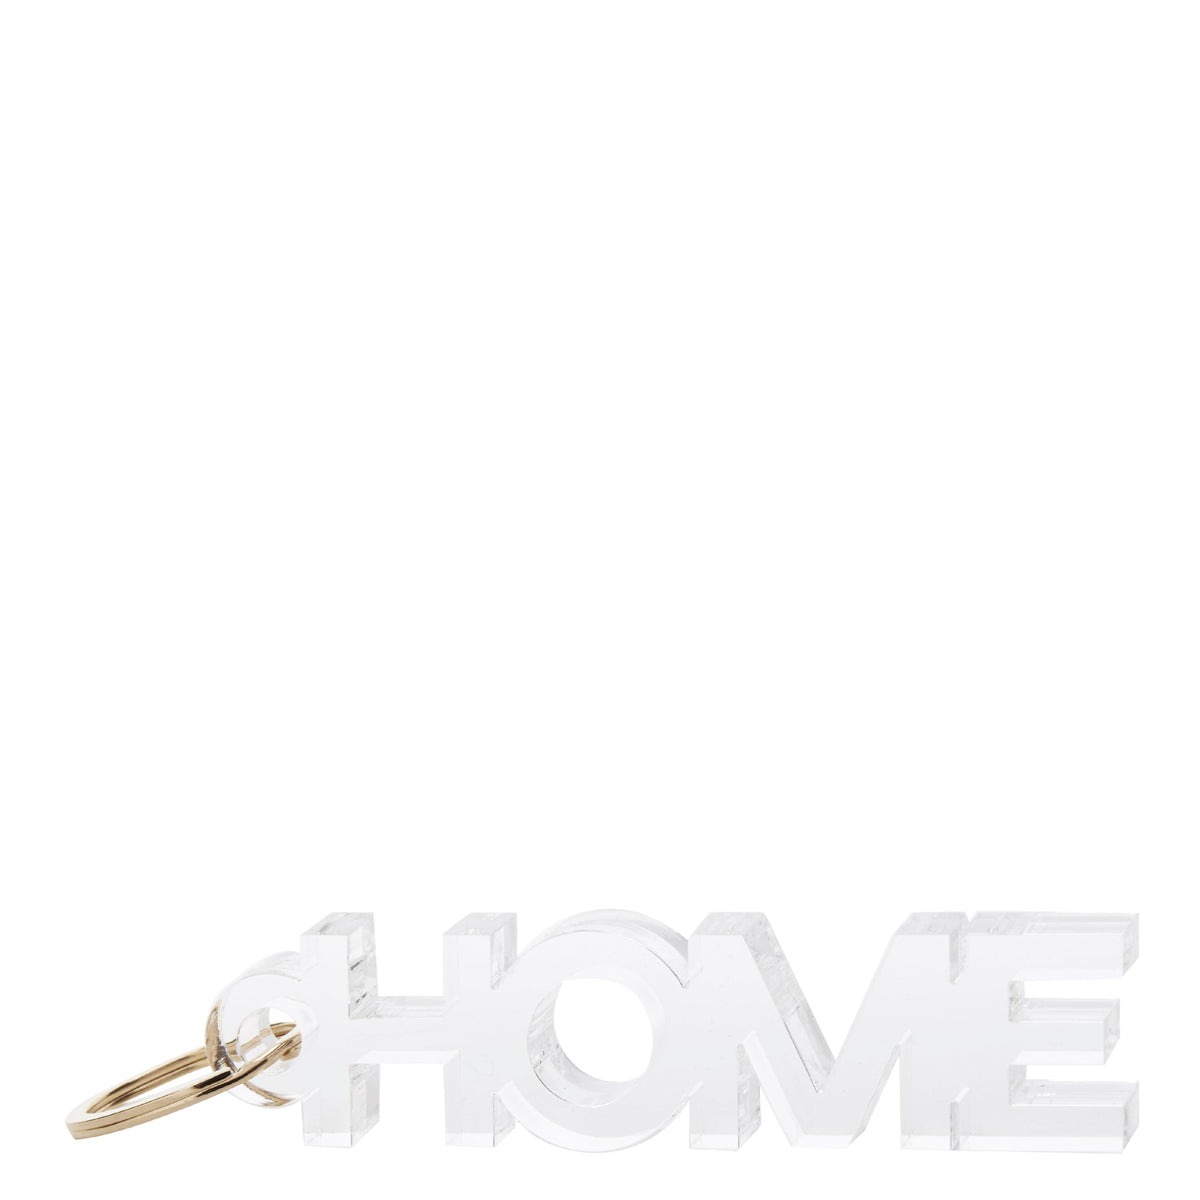 Keychain HOME 1 inches height